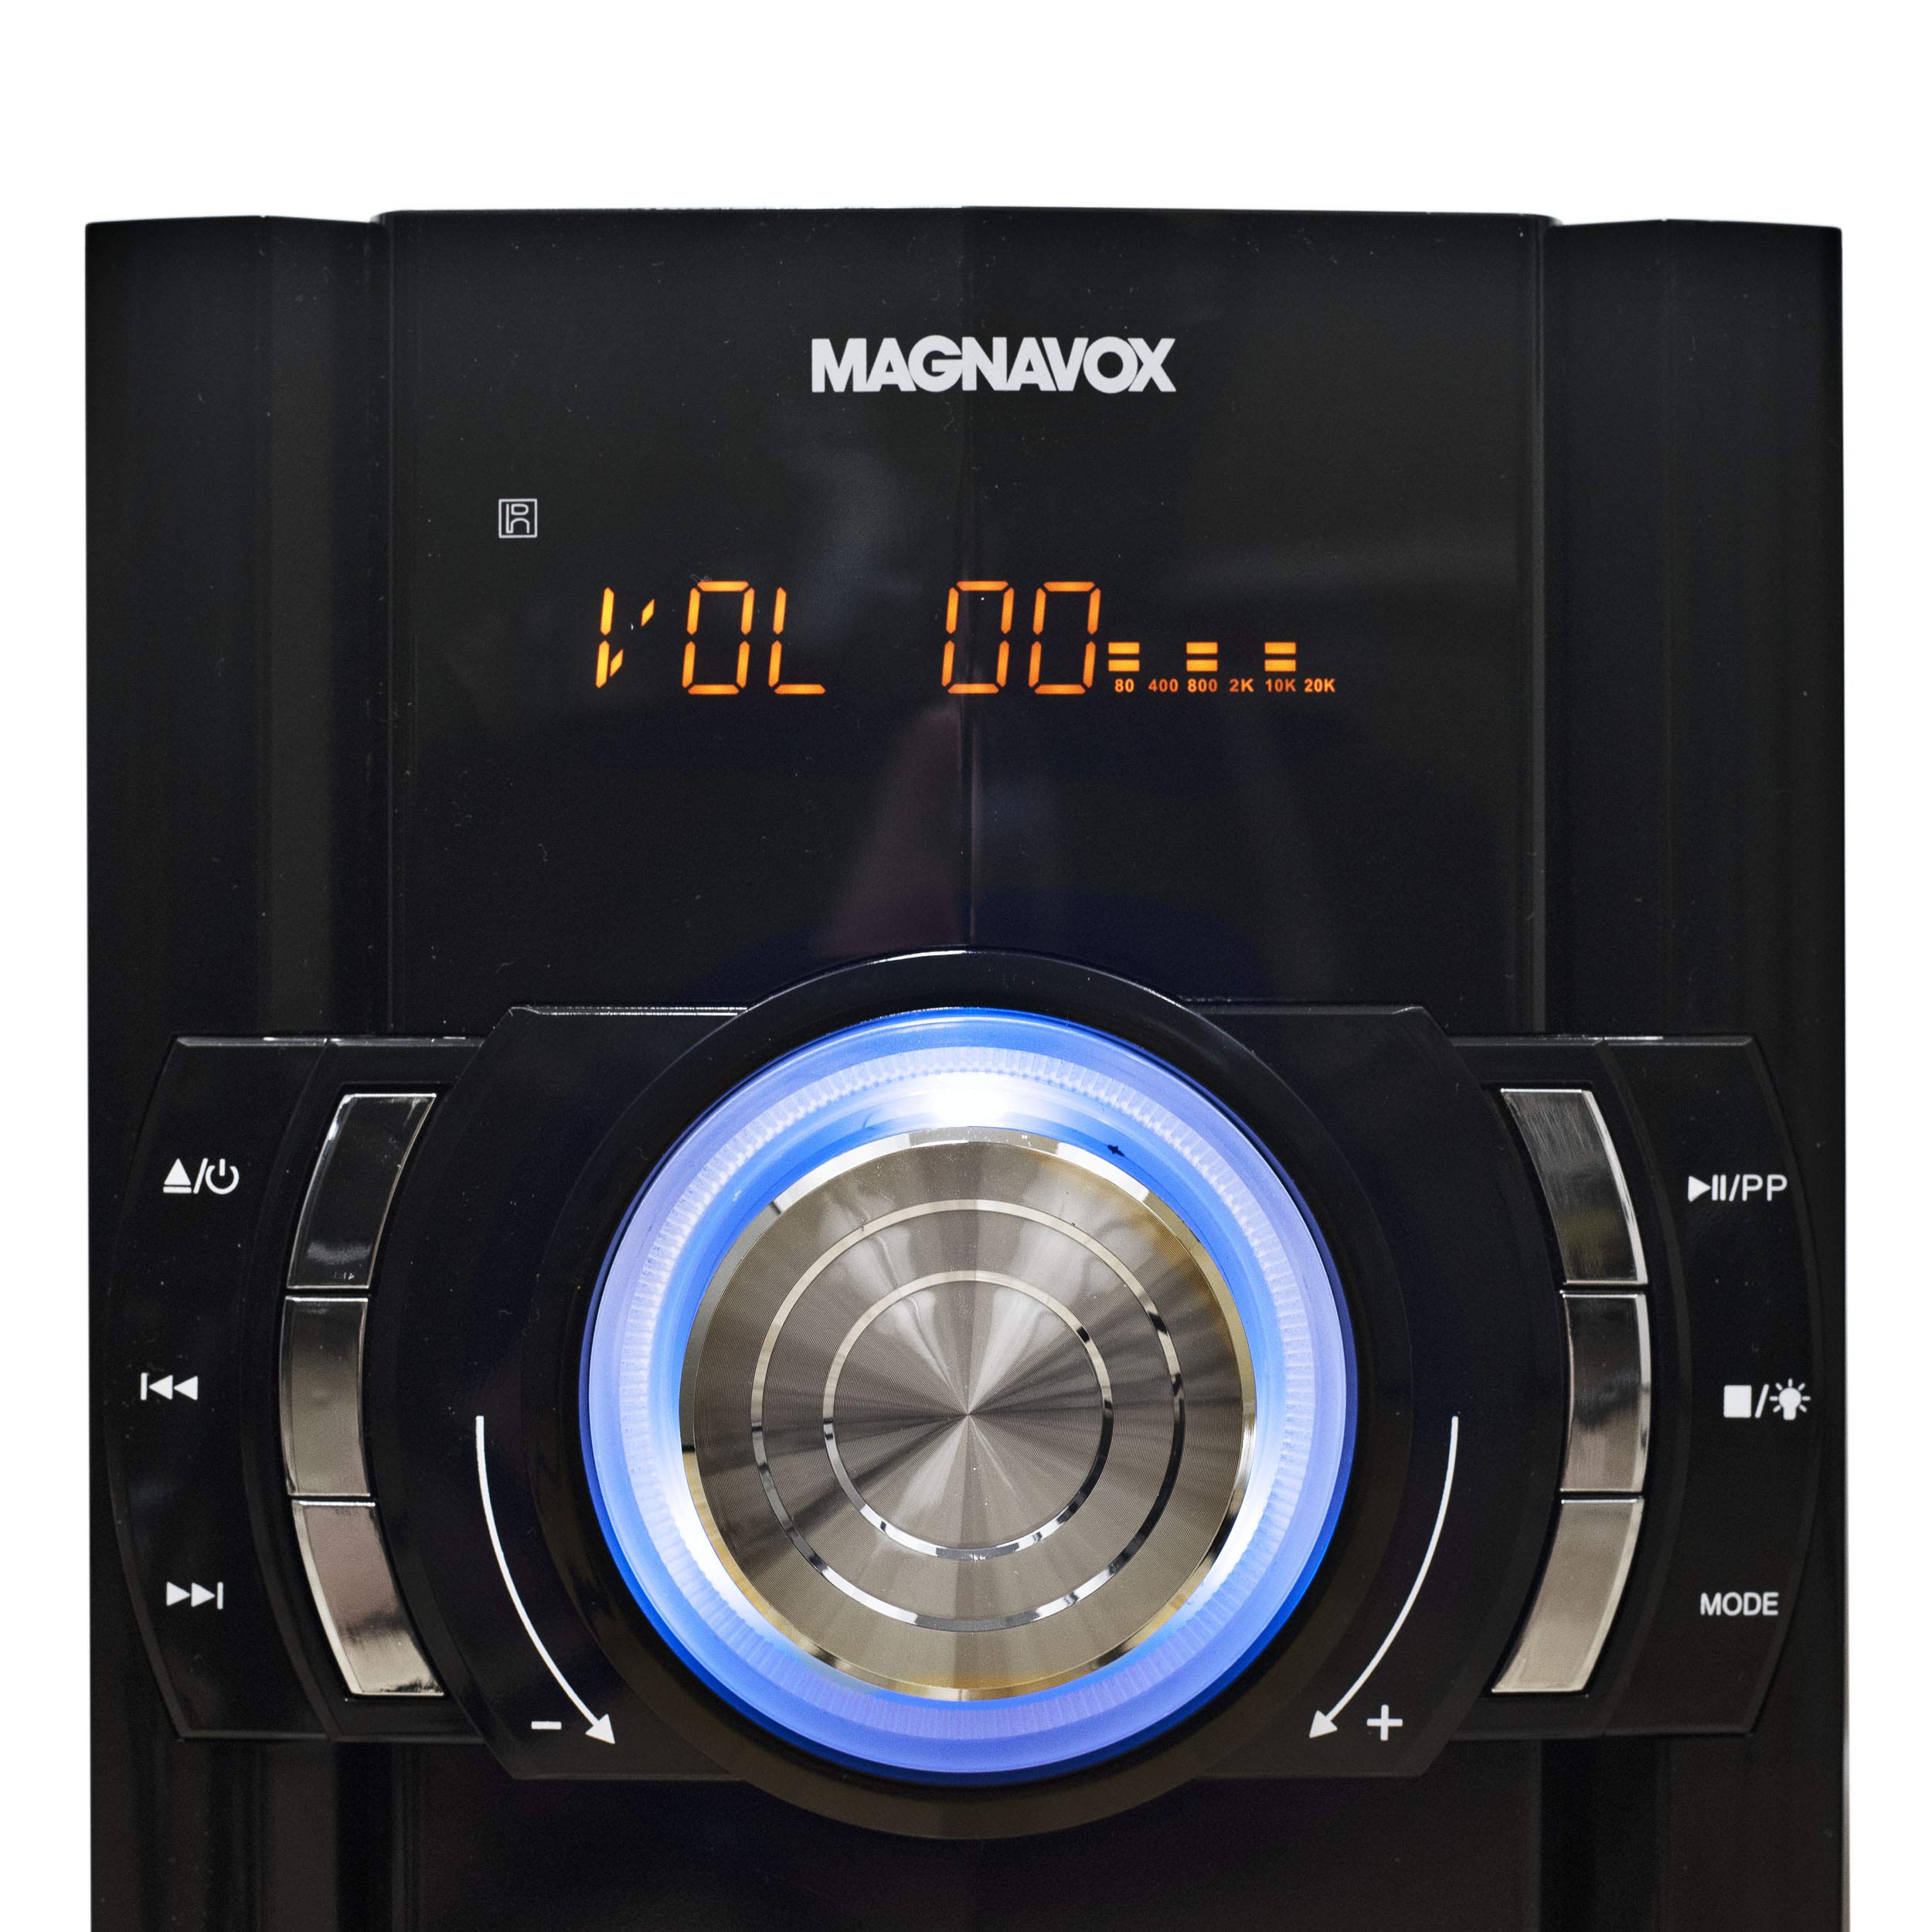 Magnavox MM440 3-Piece CD Shelf System with Digital PLL FM Stereo Radio, Bluetooth Wireless Technology, and Remote Control in Black | Blue Colored Lights | LED Display | AUX Port Compatible |